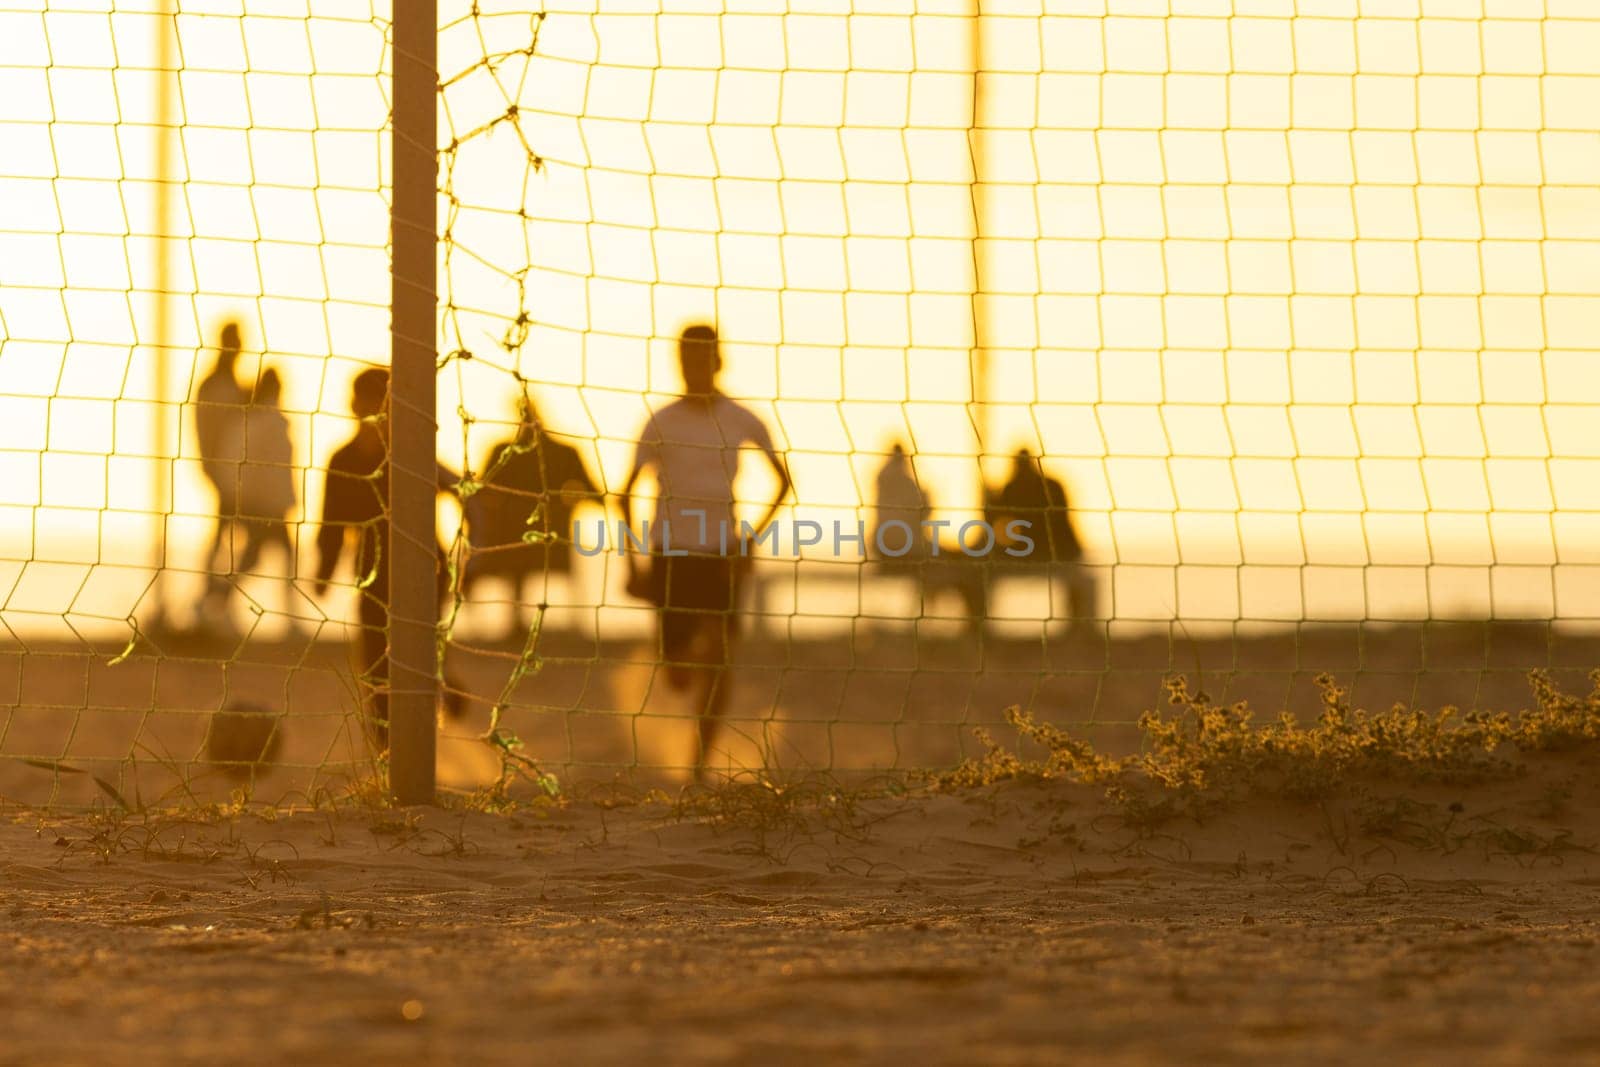 A group of people standing around a soccer goal